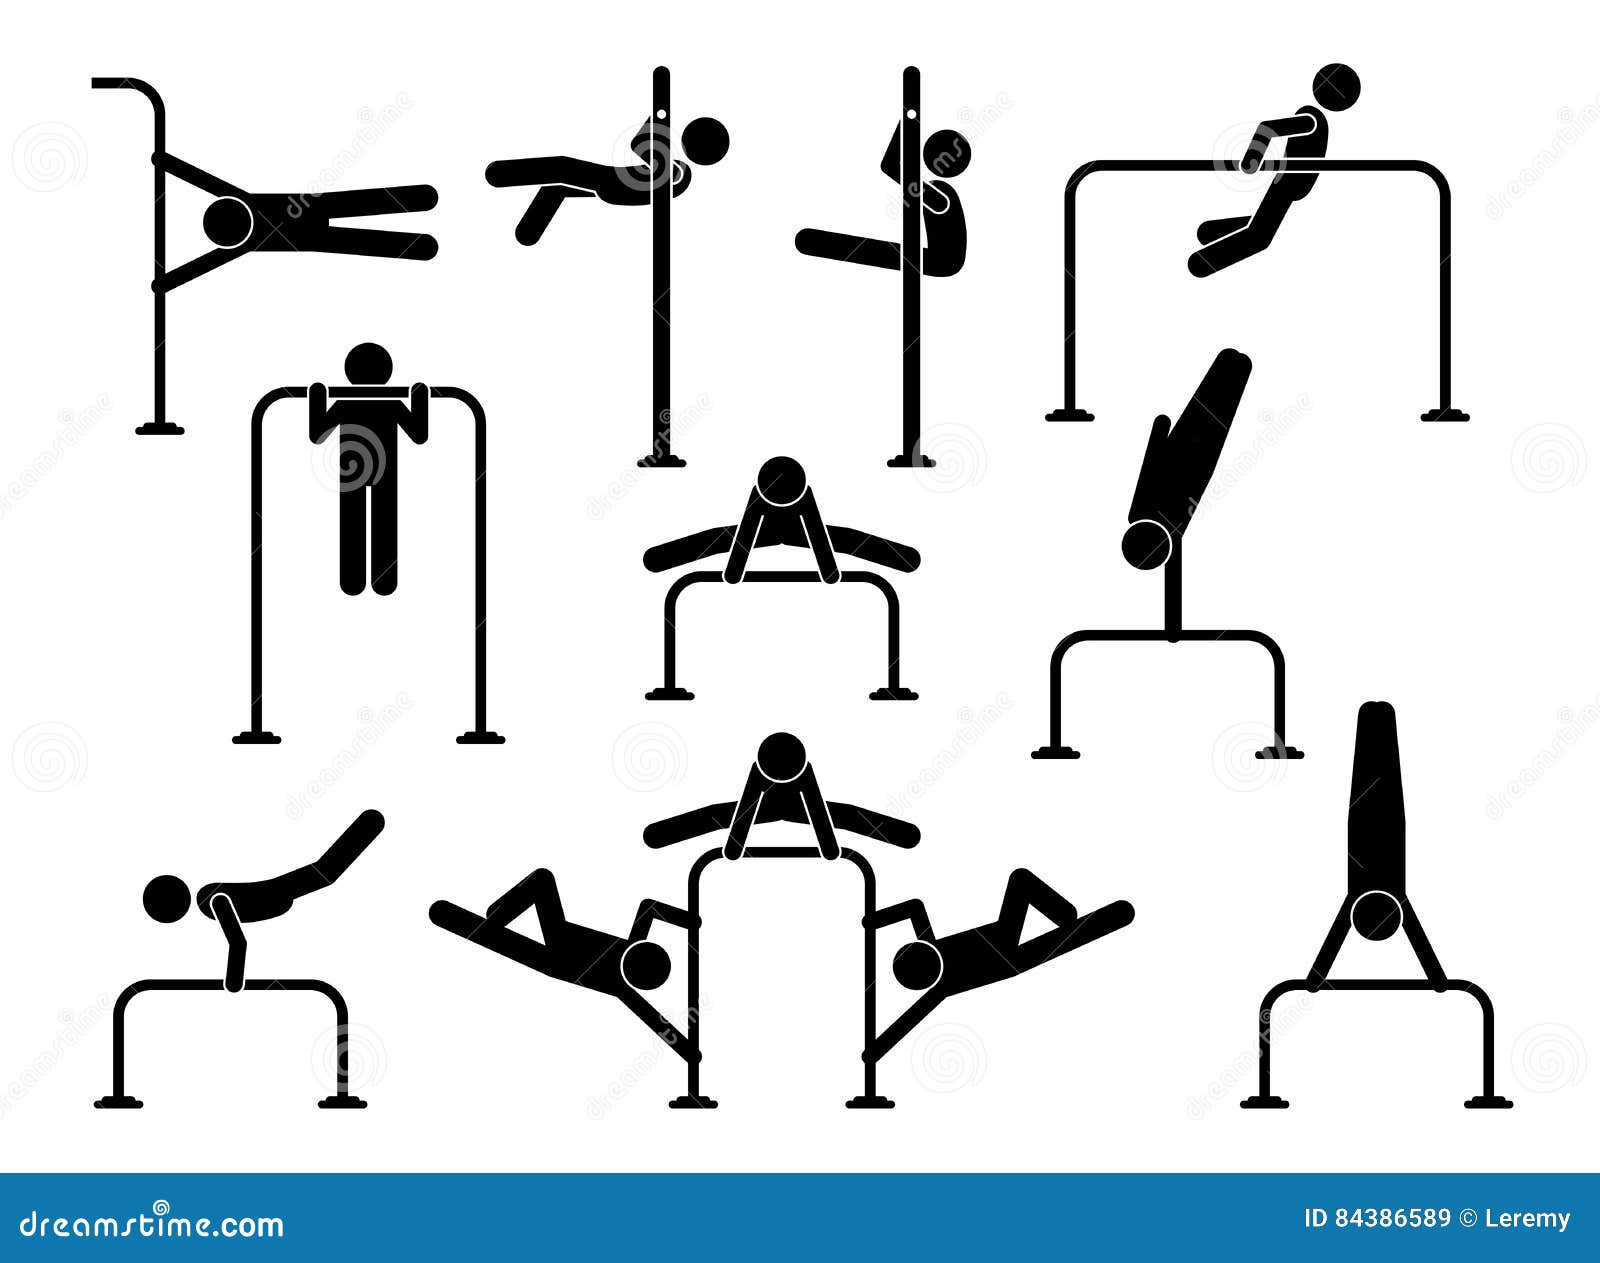 Vetor de Calisthenic silhouettes set isolated on white. Male athlete doing  human flag, planche, front lever, back lever, L-sit, clapping pushups, pull  ups and dips. Street workout and gym own weight exercises.